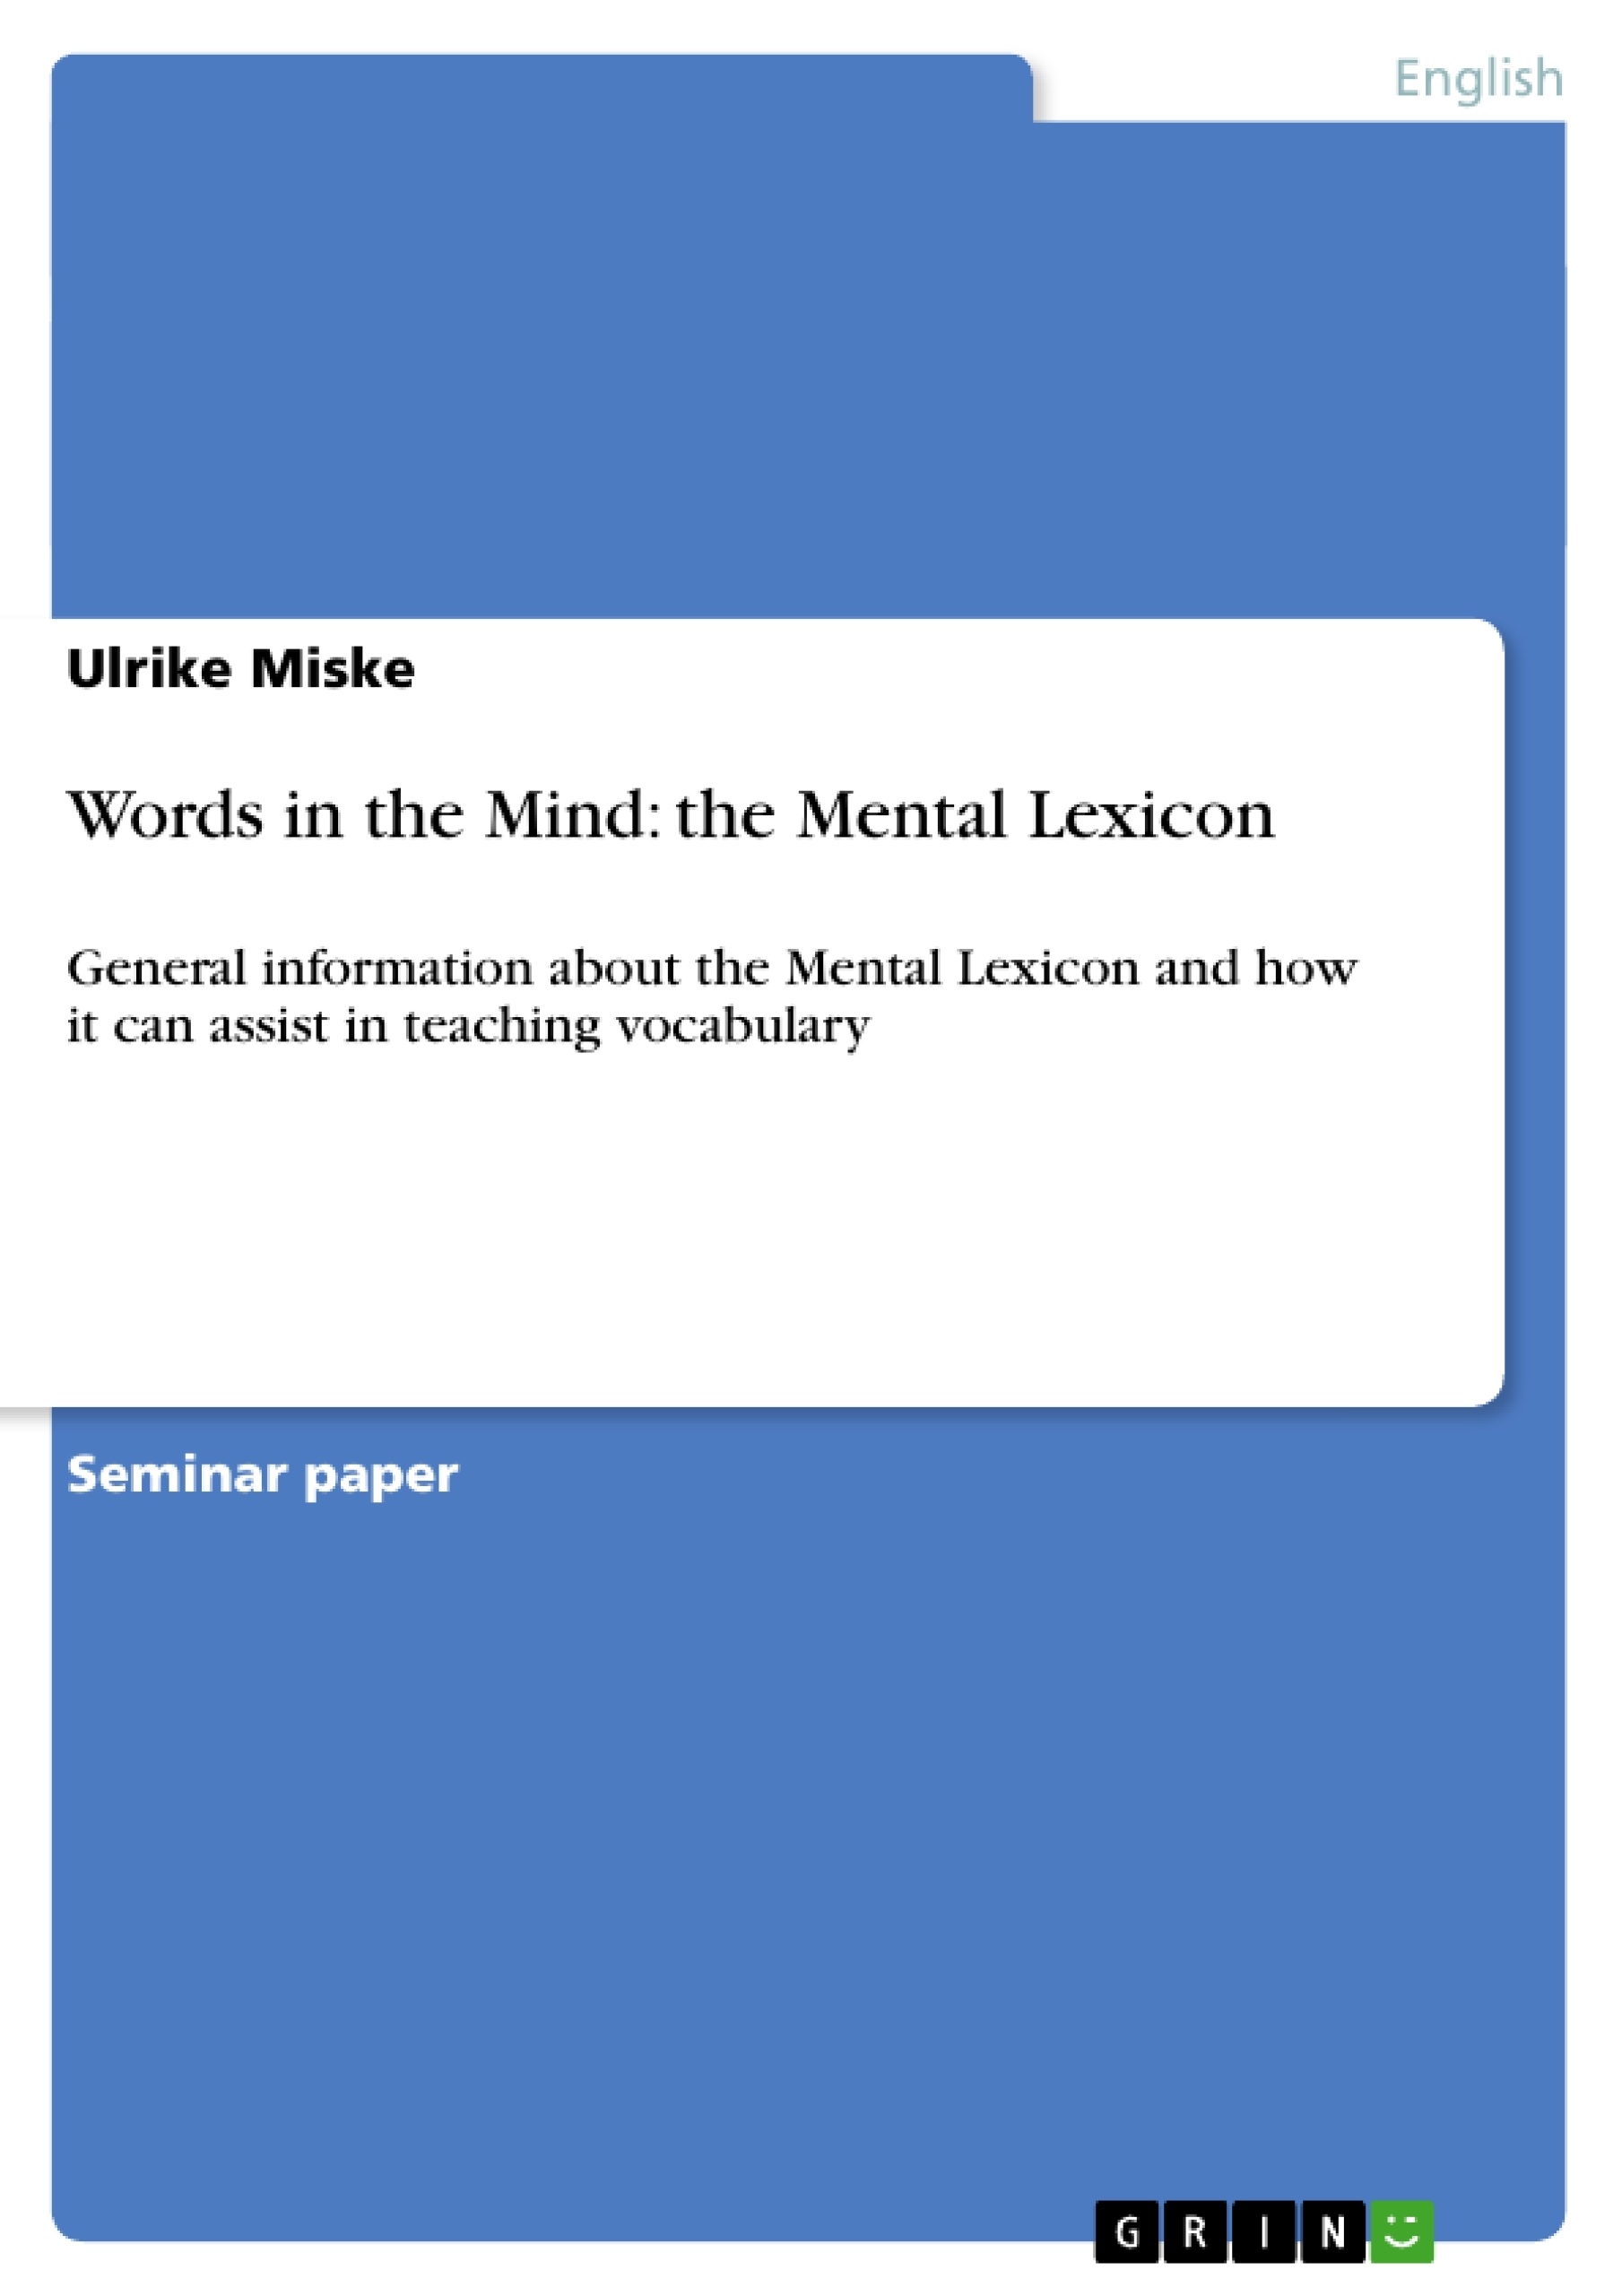 Título: Words in the Mind: the Mental Lexicon